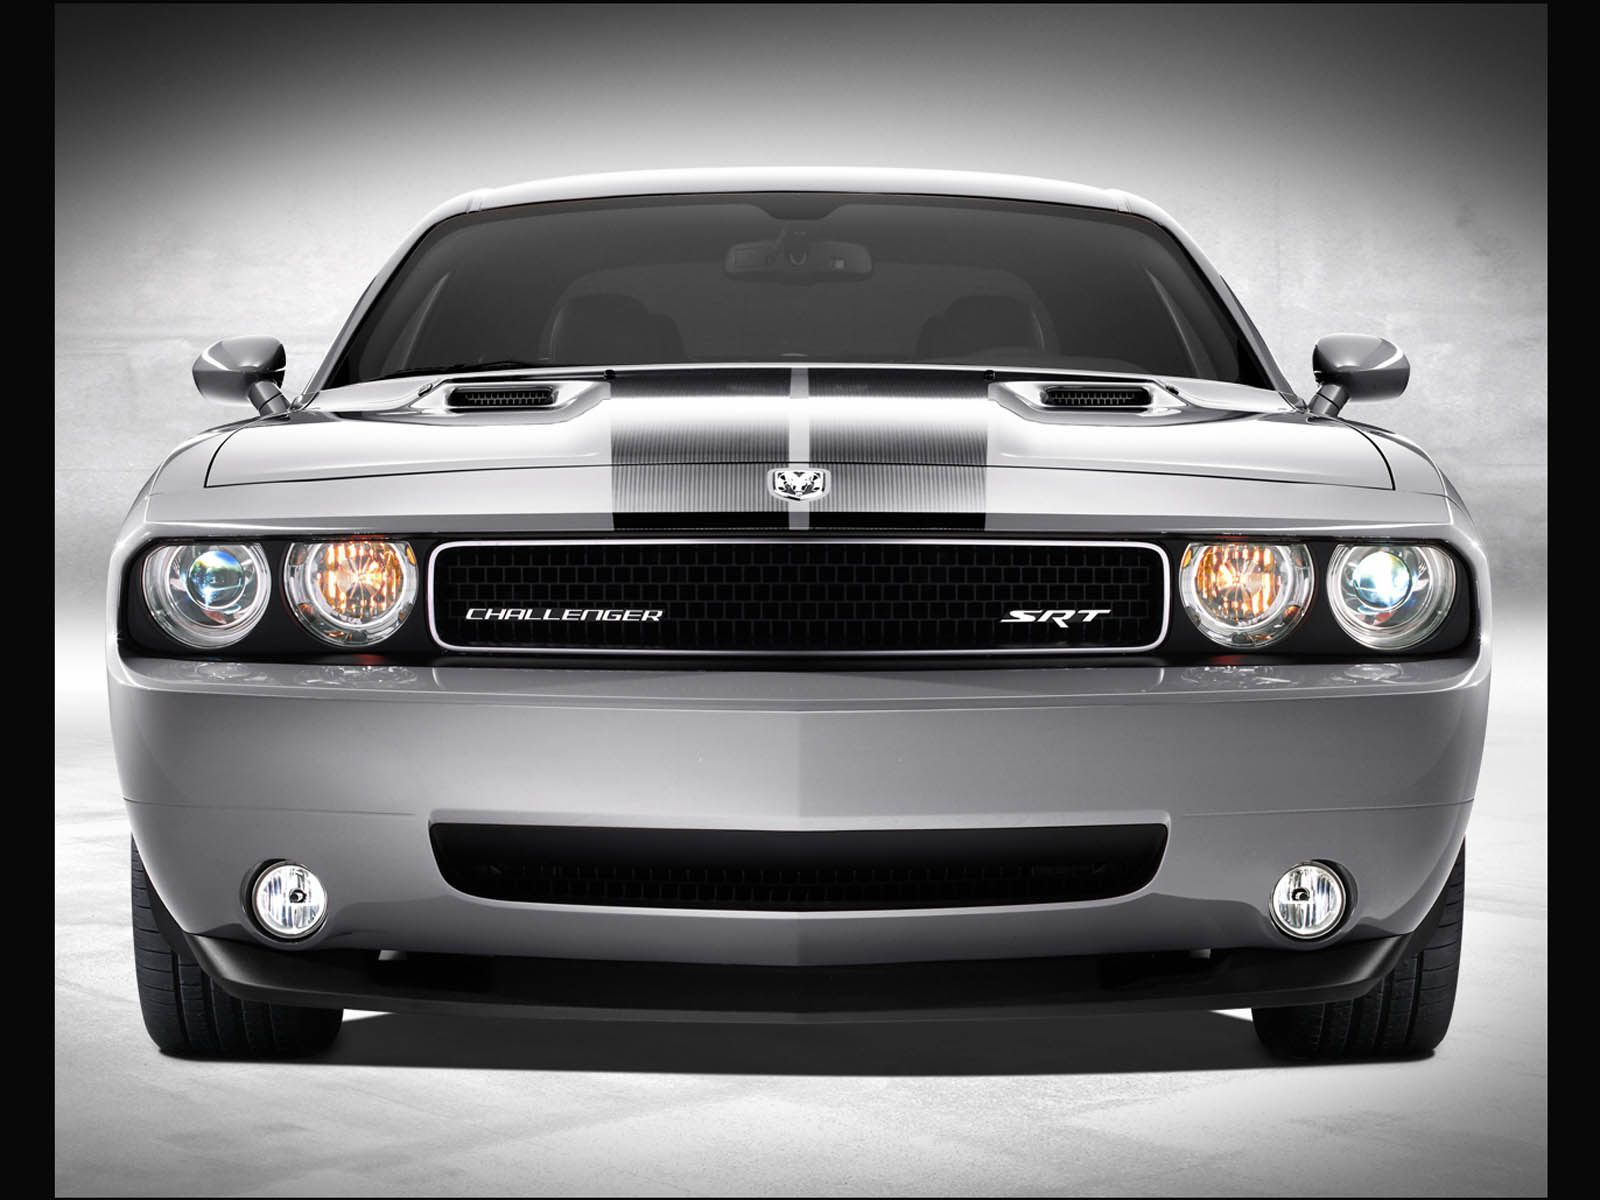 Are Watching The Dodge Challenger Srt8 Car Wallpaper